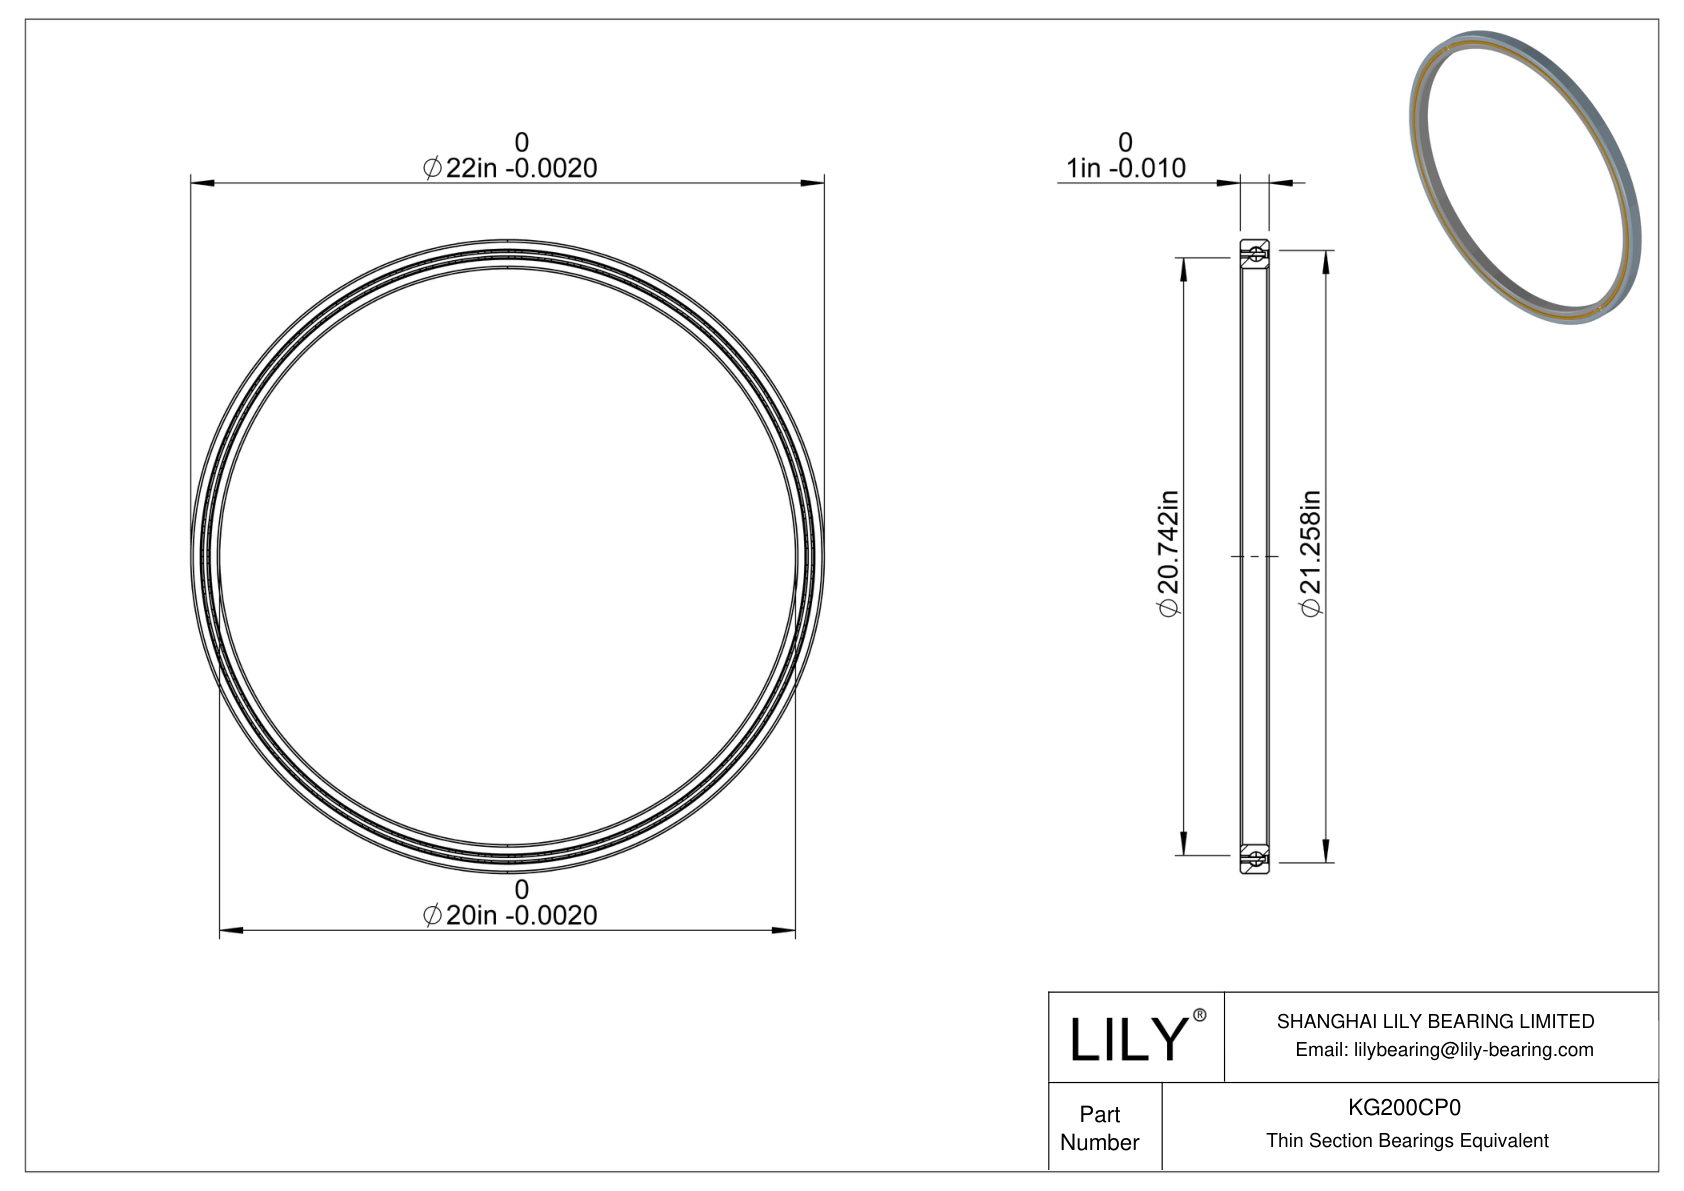 KG200CP0 Constant Section (CS) Bearings cad drawing